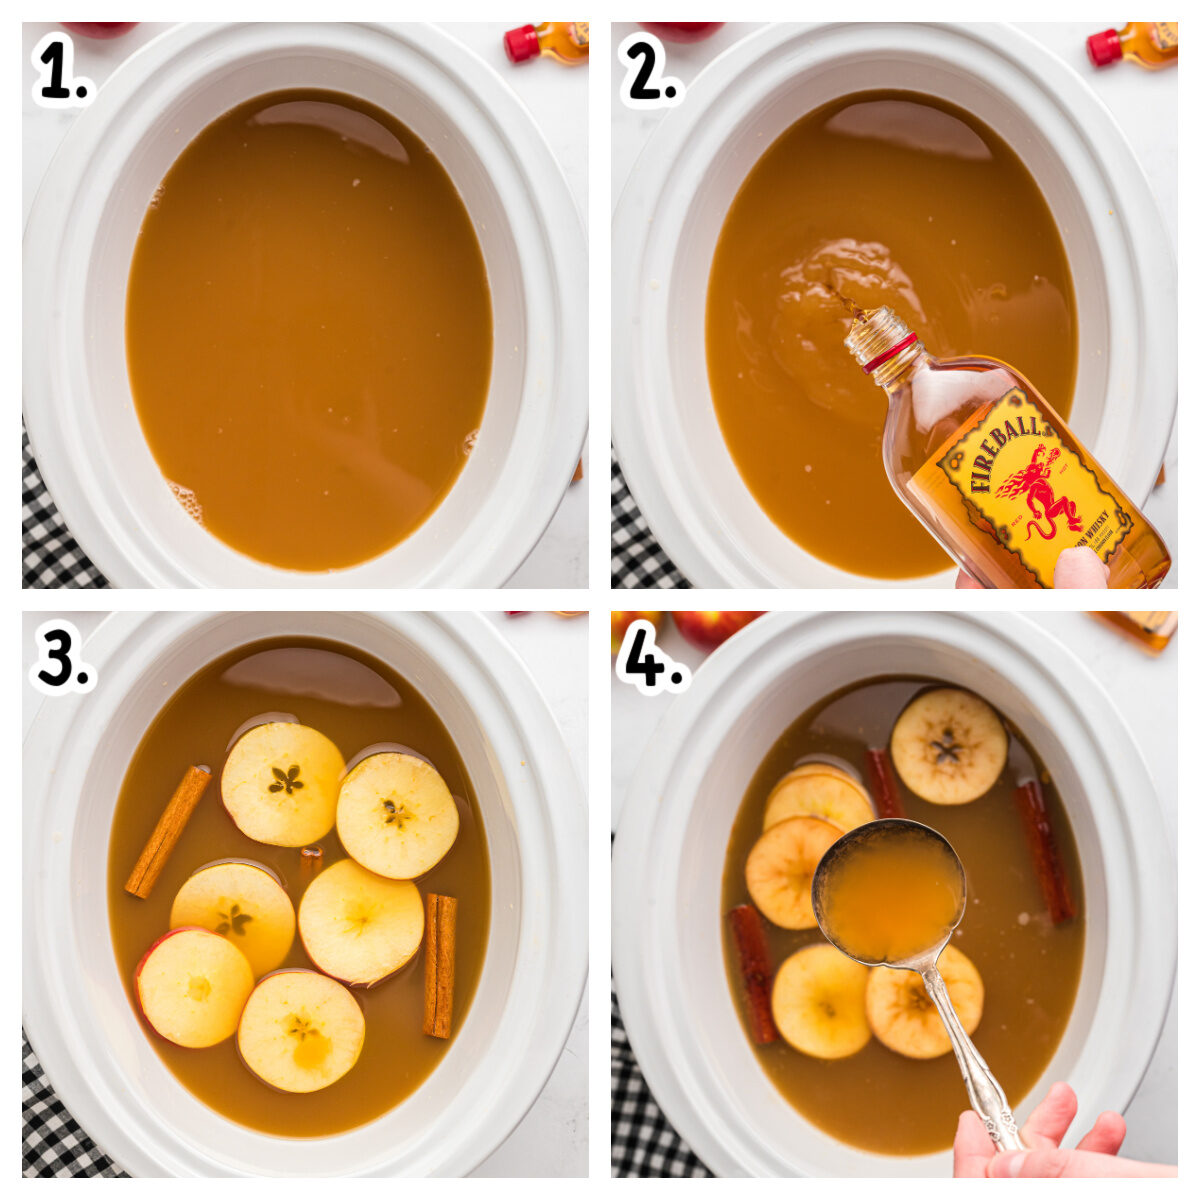 4 images showing how to make fireball caramel apple cider.